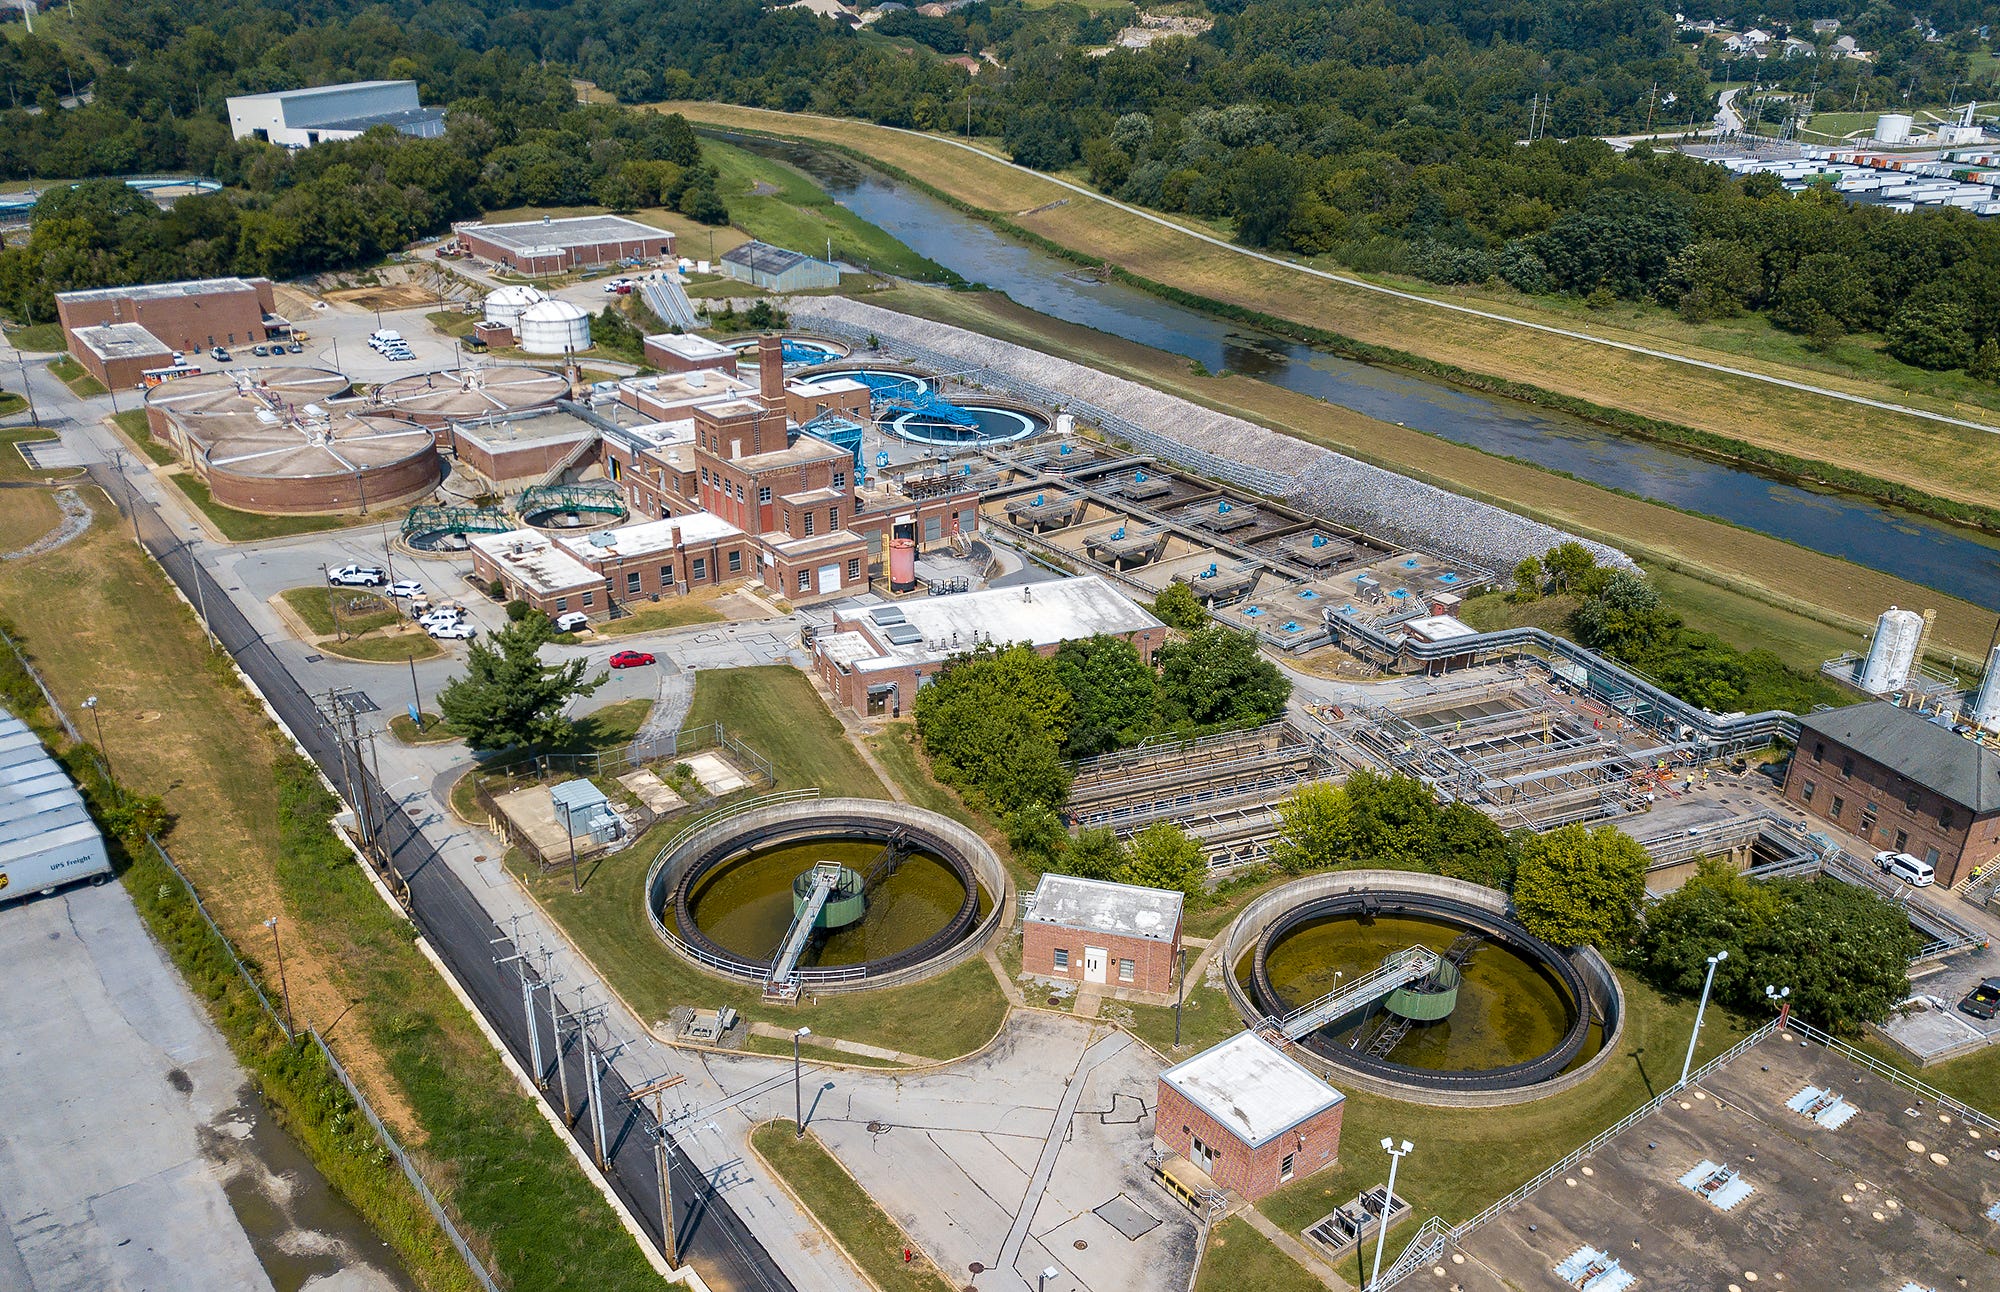 The City of York's wastewater treatment plant.
Tuesday, August 25, 2020
John A. Pavoncello photo